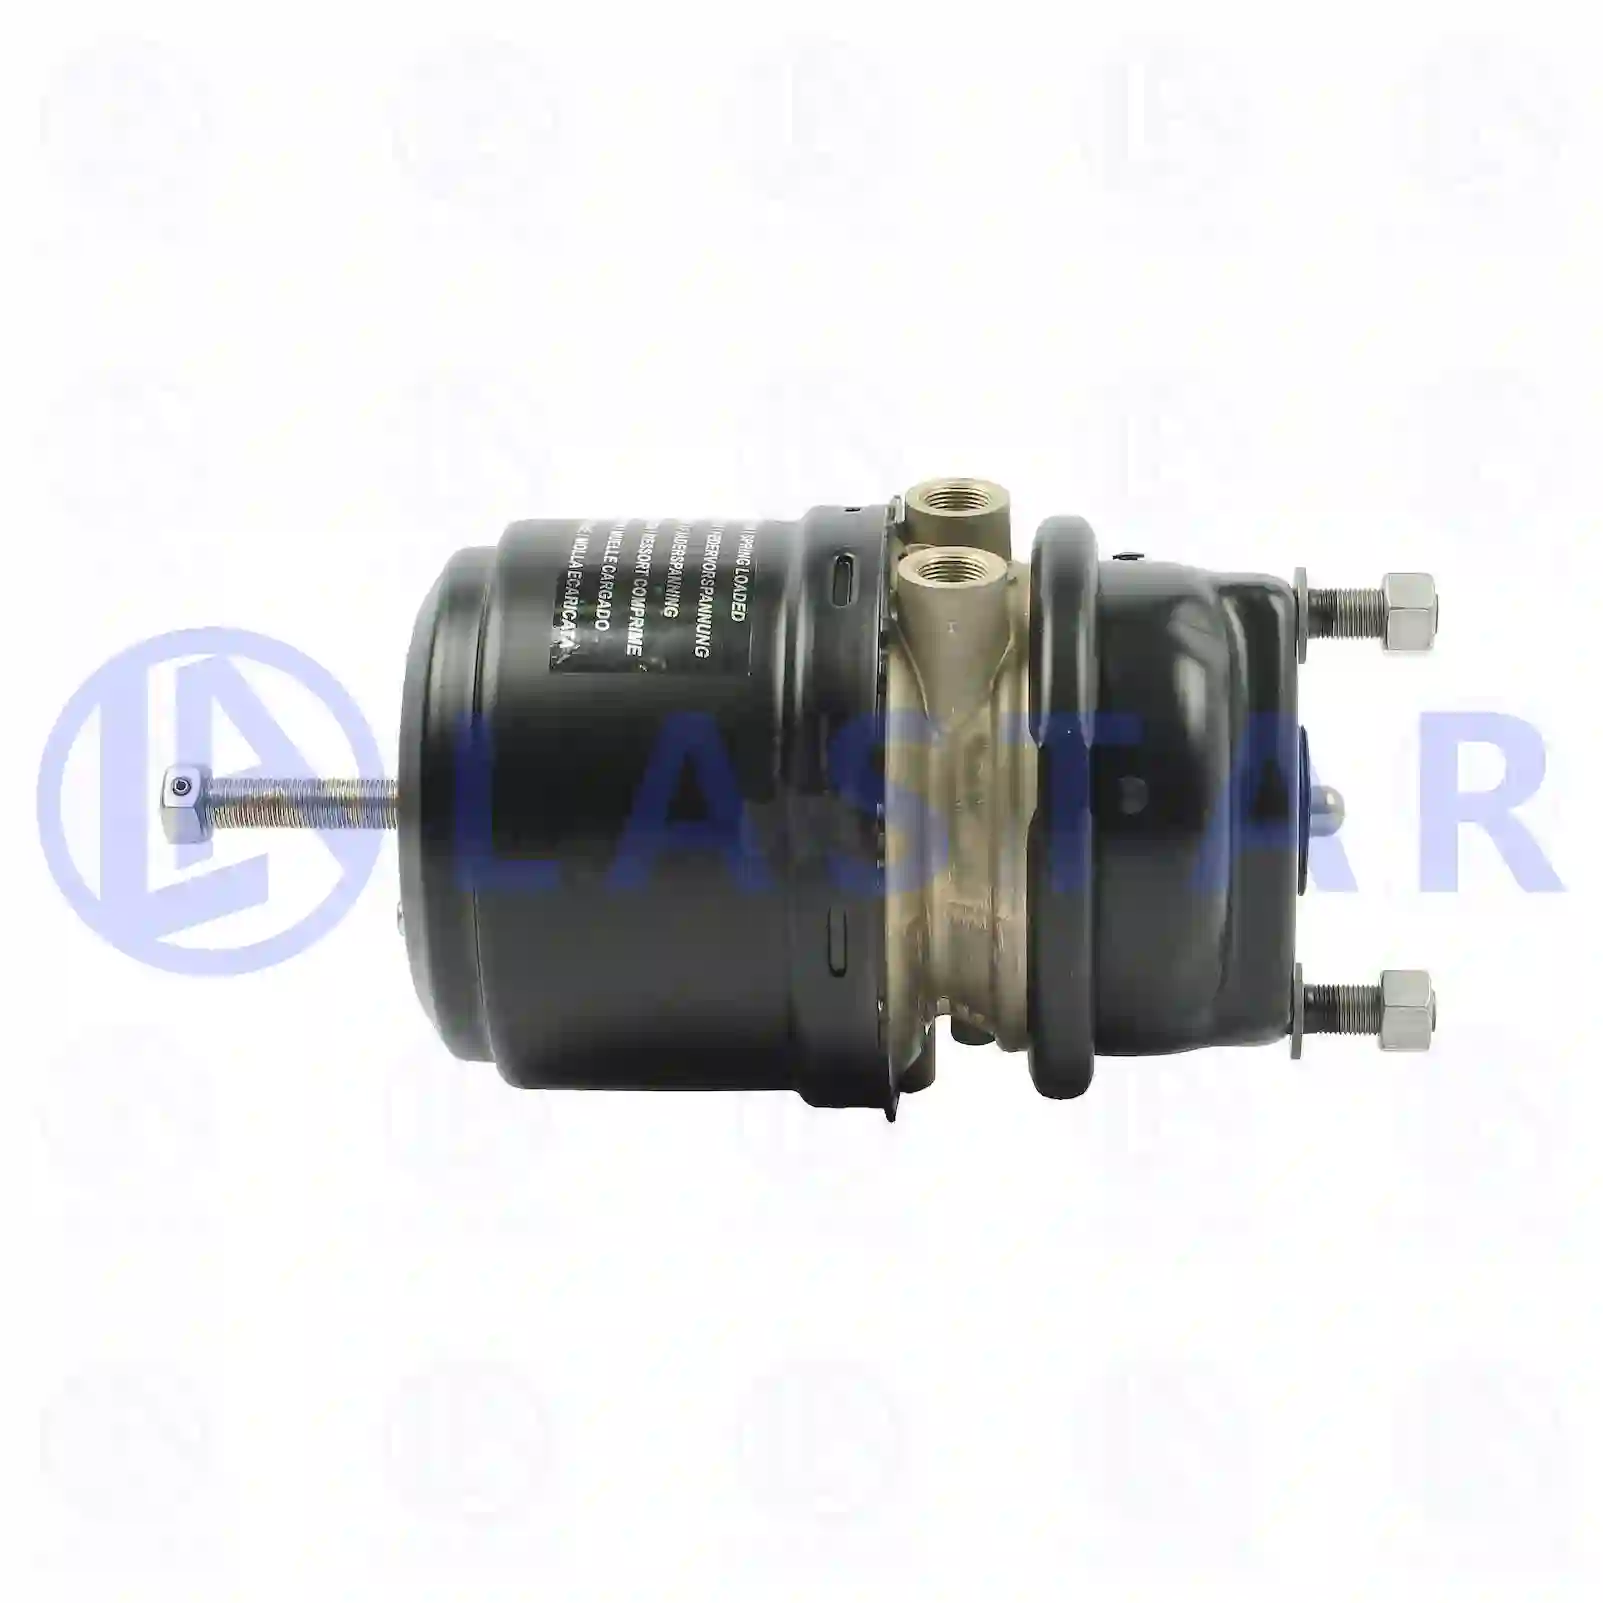 Spring brake cylinder, right, 77715214, 0154207518, 0154208518, 0204203318, 0204204918, ||  77715214 Lastar Spare Part | Truck Spare Parts, Auotomotive Spare Parts Spring brake cylinder, right, 77715214, 0154207518, 0154208518, 0204203318, 0204204918, ||  77715214 Lastar Spare Part | Truck Spare Parts, Auotomotive Spare Parts